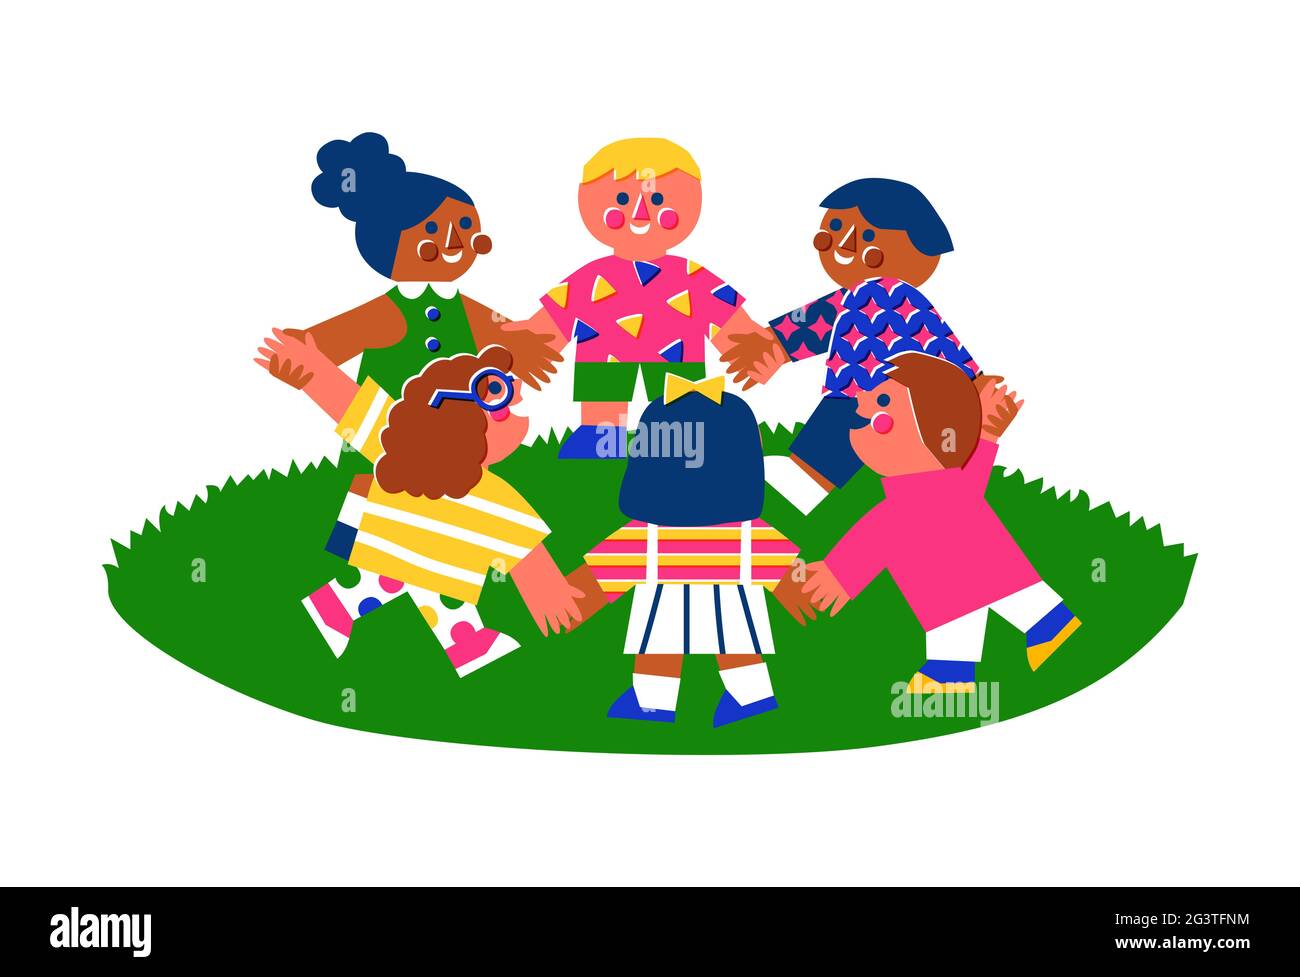 Diverse happy children friend group holding hands together outdoors in retro cartoon style. Kid school teamwork or friendship concept on isolated whit Stock Vector